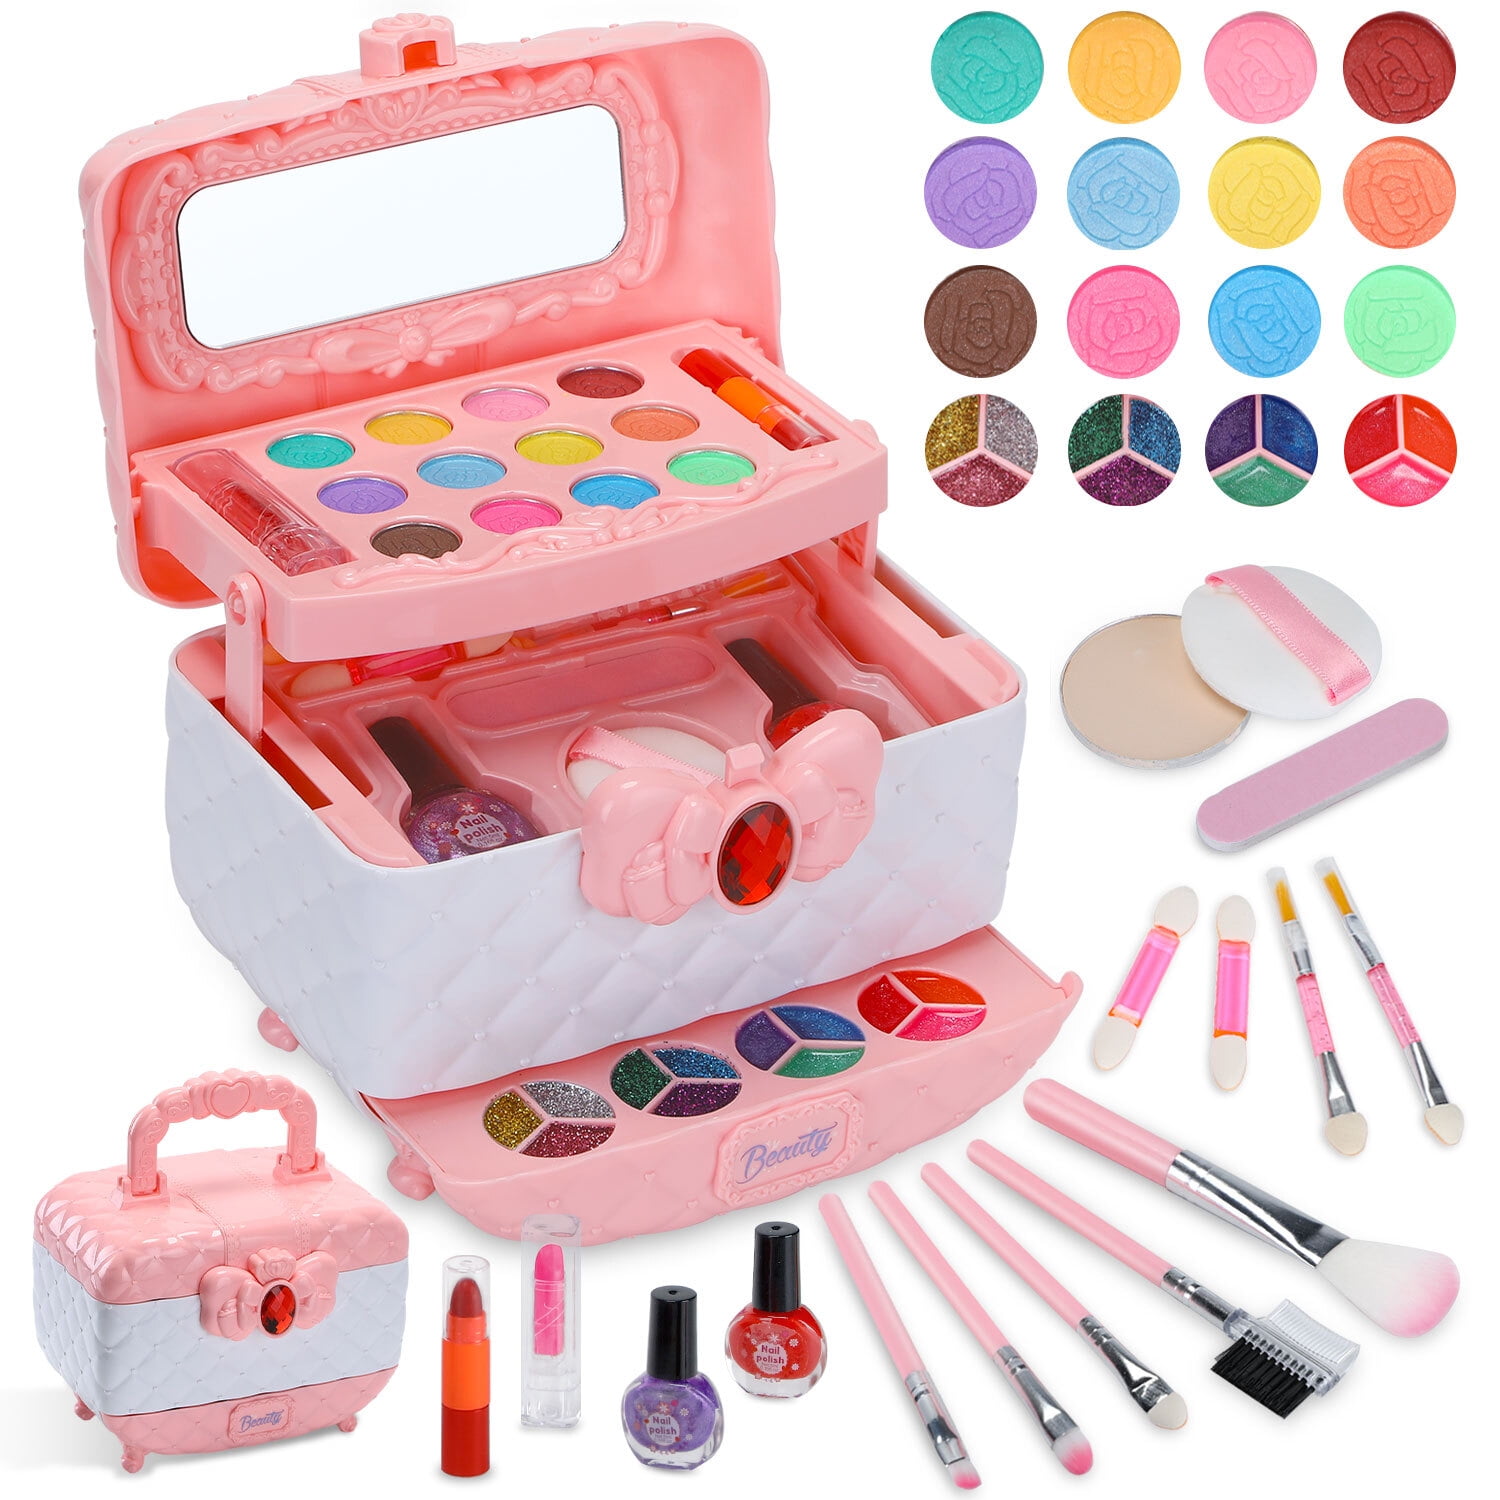  Kids Makeup Kit for Girl, Washable Makeup Set for Girls, Real  Makeup for Kids, Girl Toys Princess Children Play Makeup Kit with Cosmetic  Case Christmas Birthday Gifts for Girls Age 4